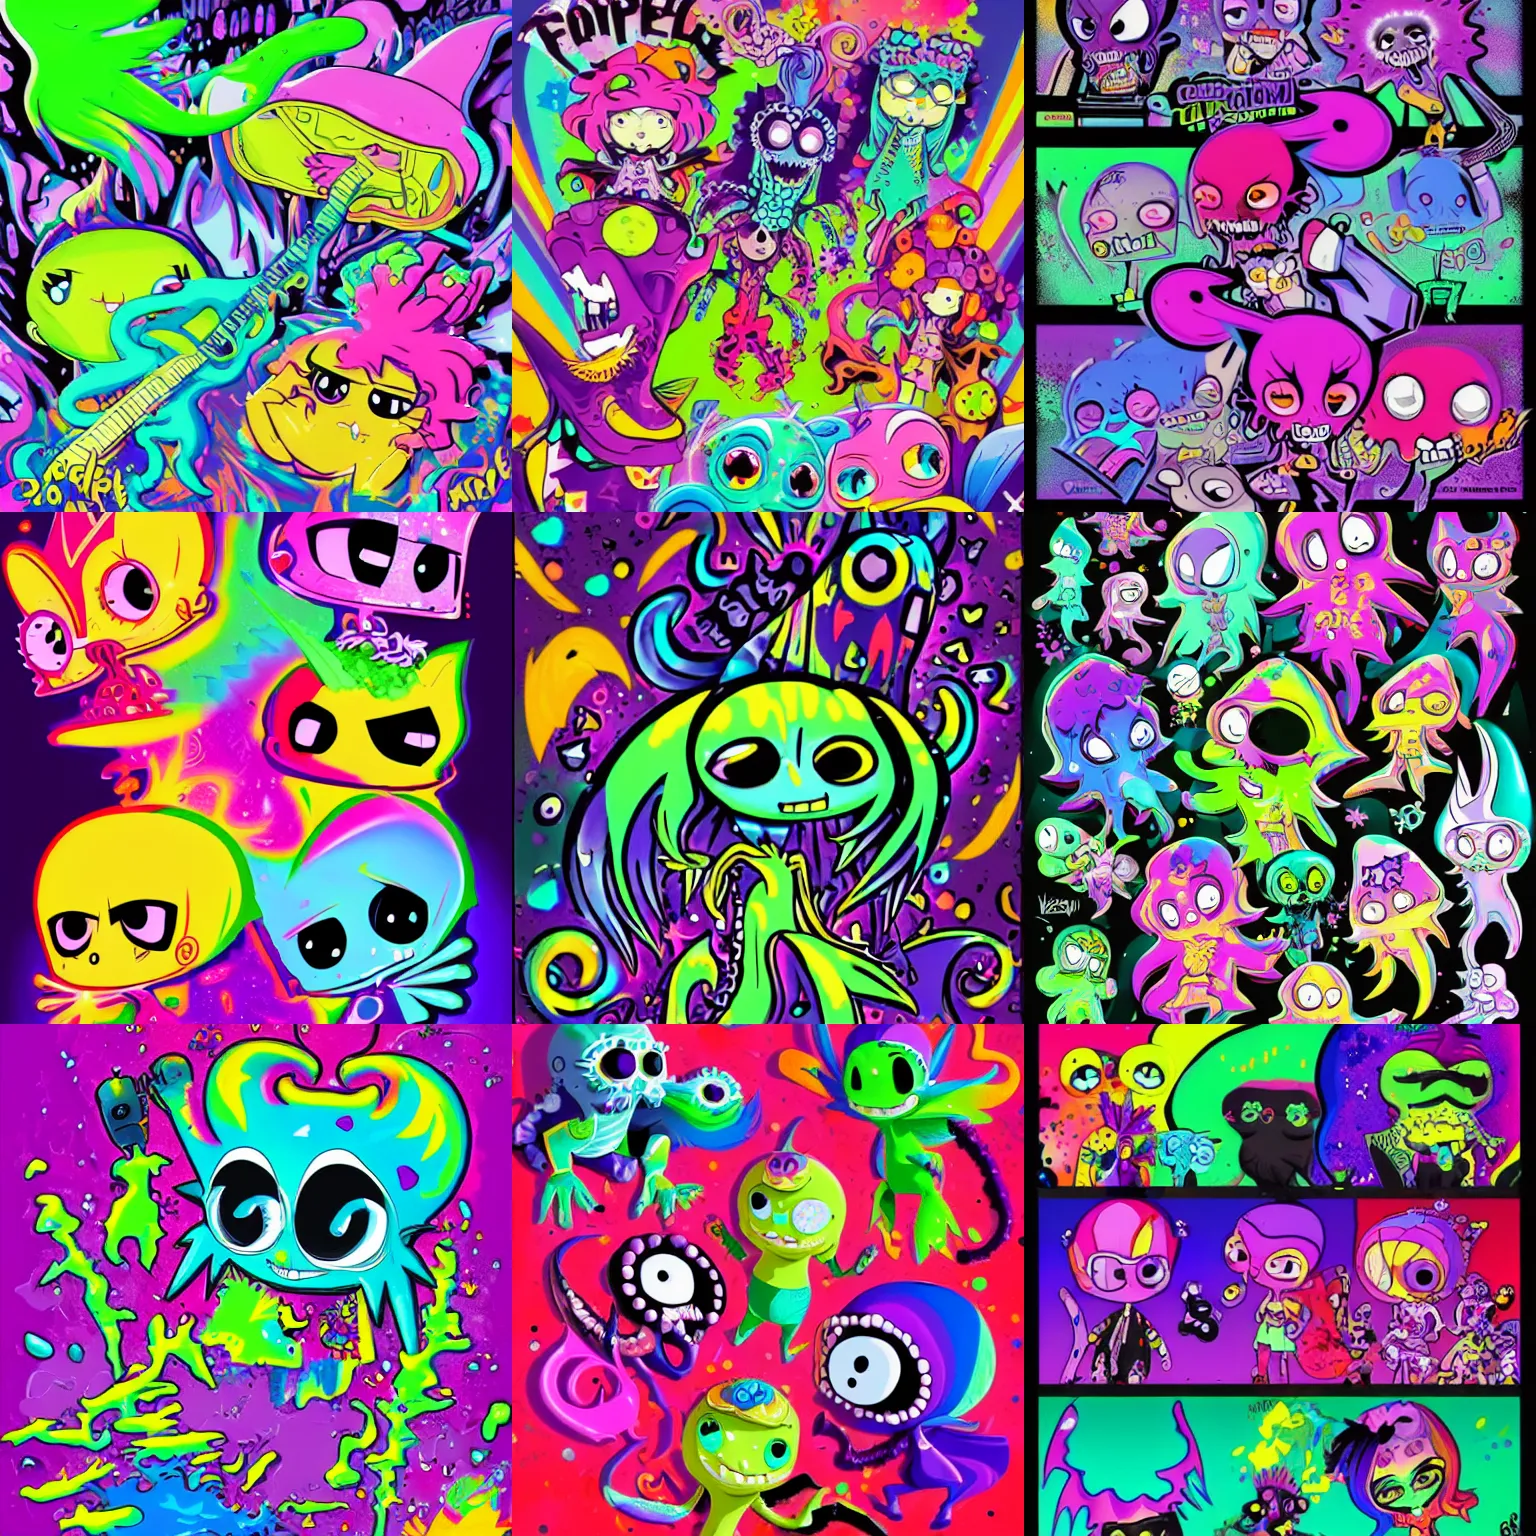 Prompt: lisa frank colorful confetti spray paint explosion gothic punk toxic bioluminescent glow in the dark vampiric rockstar vampire squid concept character designs of various shapes and sizes by genndy tartakovsky and the creators of fret nice at pieces interactive and splatoon by nintendo and the psychonauts by doublefine tim shafer artists for the new hotel transylvania film managed by pixar and overseen by Jamie Hewlett from gorillaz